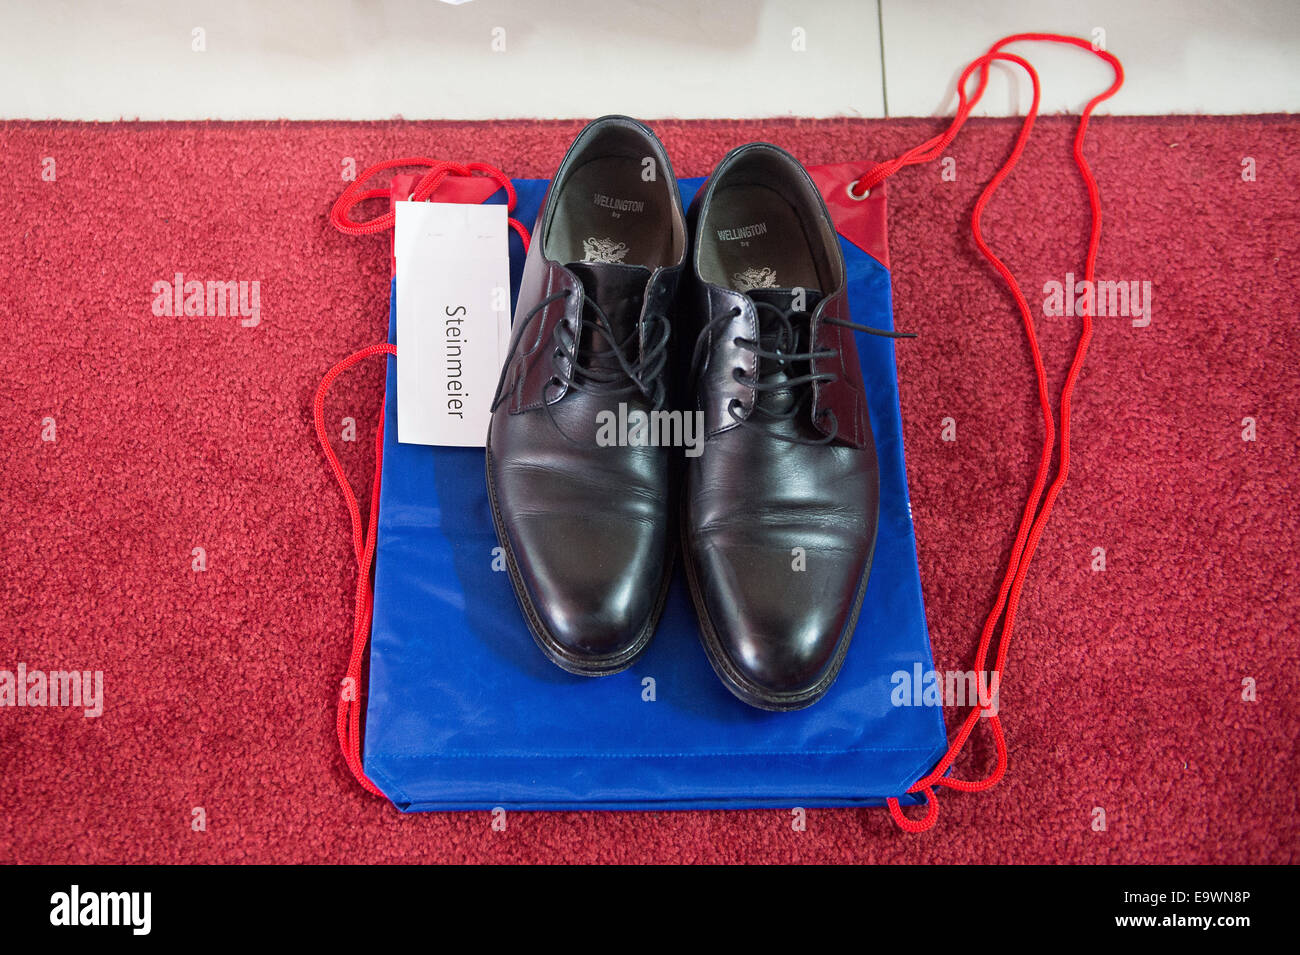 German Foreign Minister Frank-Walter Steinmeier's shoes while he visits the  Istiqlal Mosque in Jakarta, Indonesia, 03 November, 2014. Photo: MAURIZIO  GAMBARINI/dpa Stock Photo - Alamy